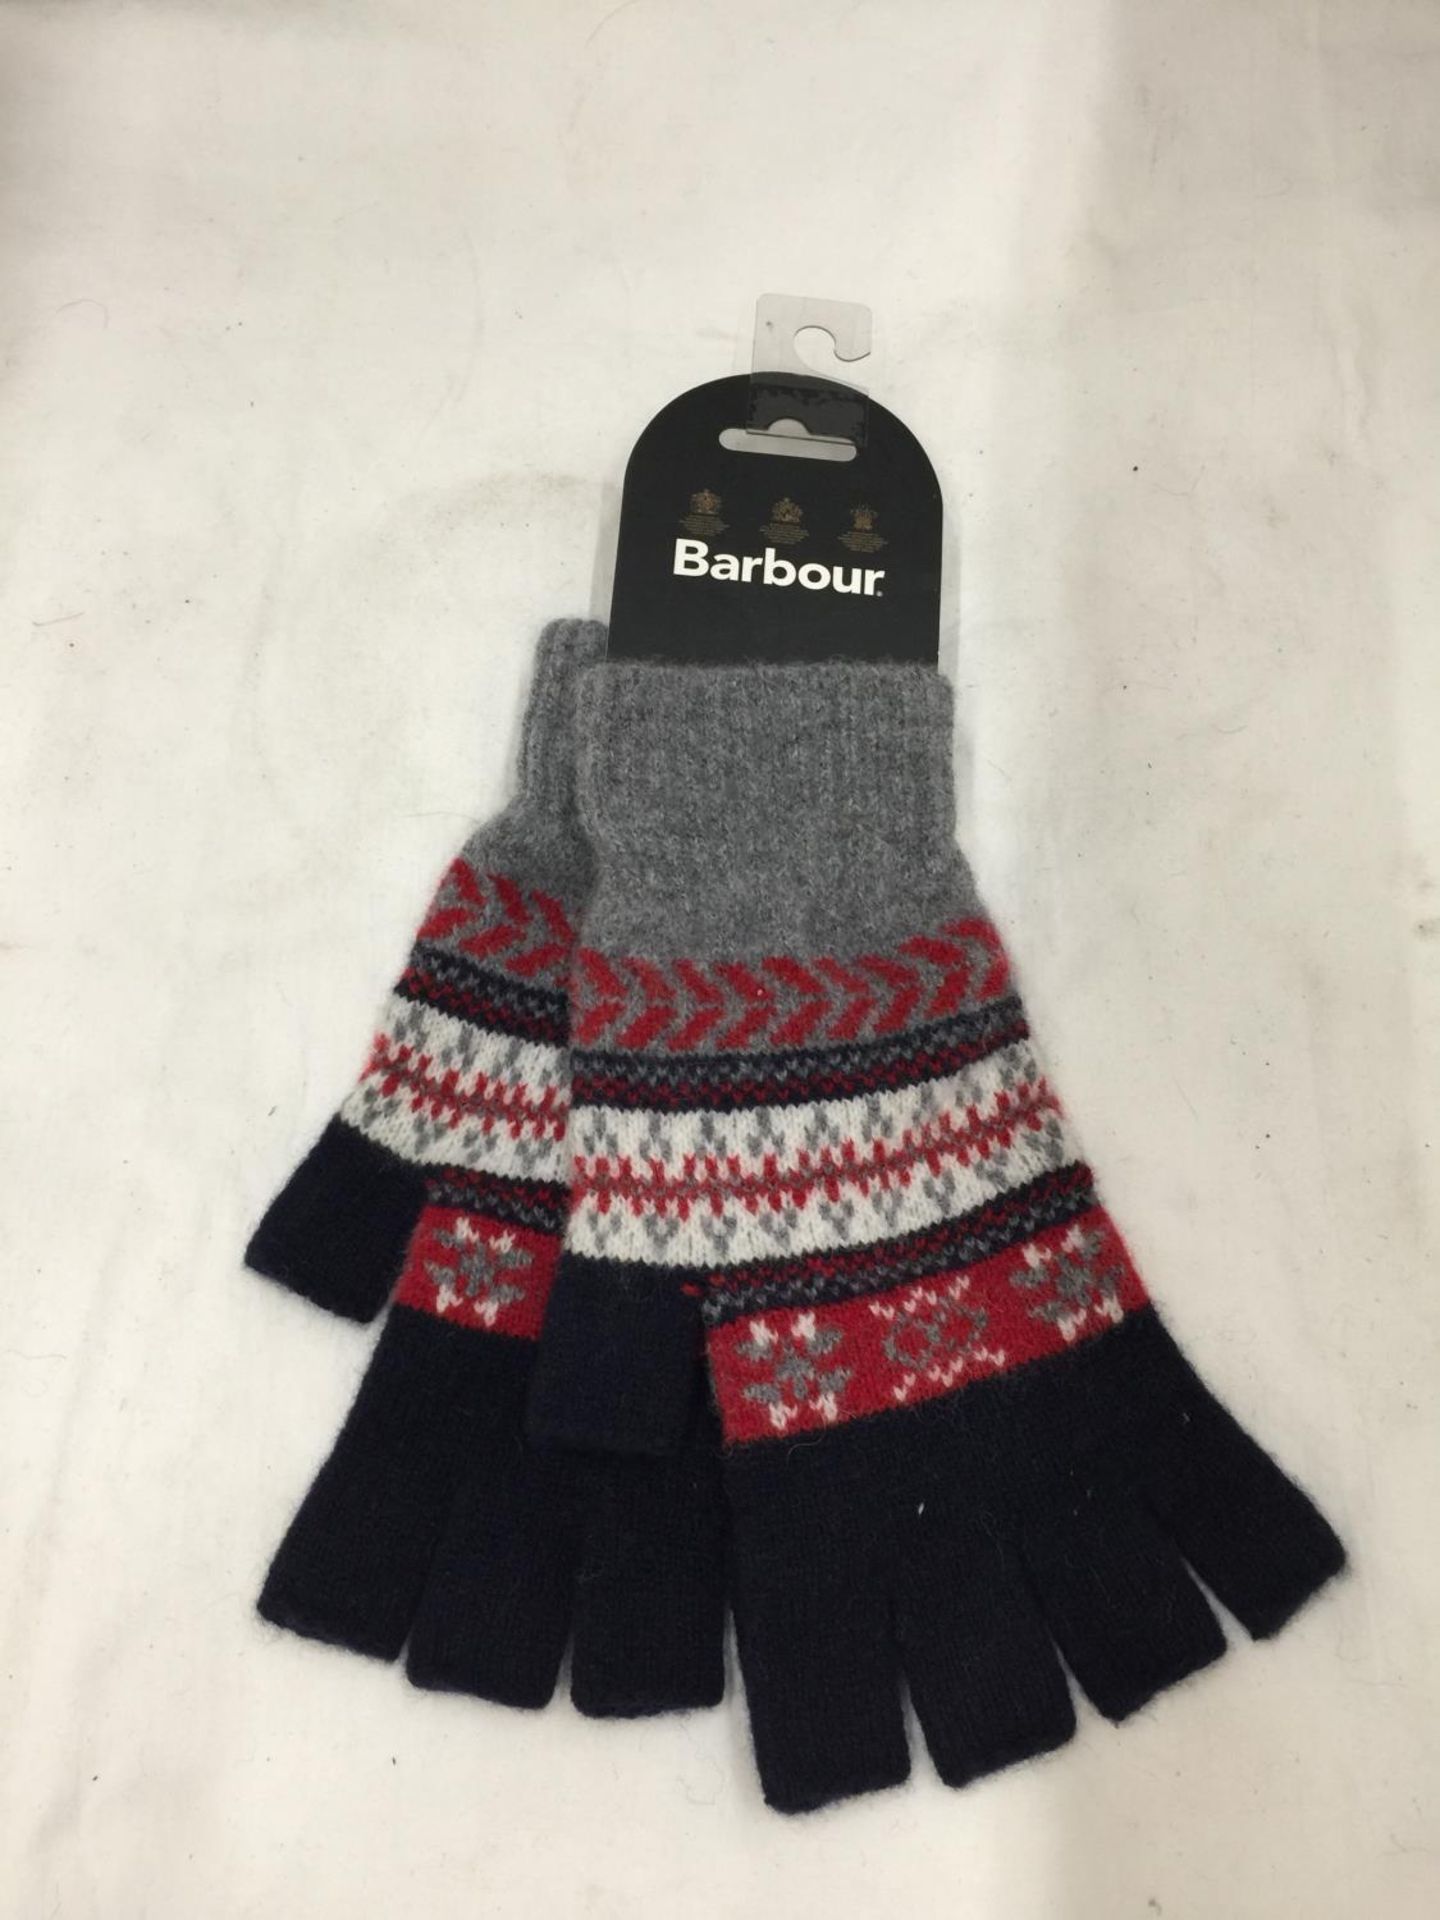 A PAIR OF AS NEW BARBOUR FINGERLESS GLOVES